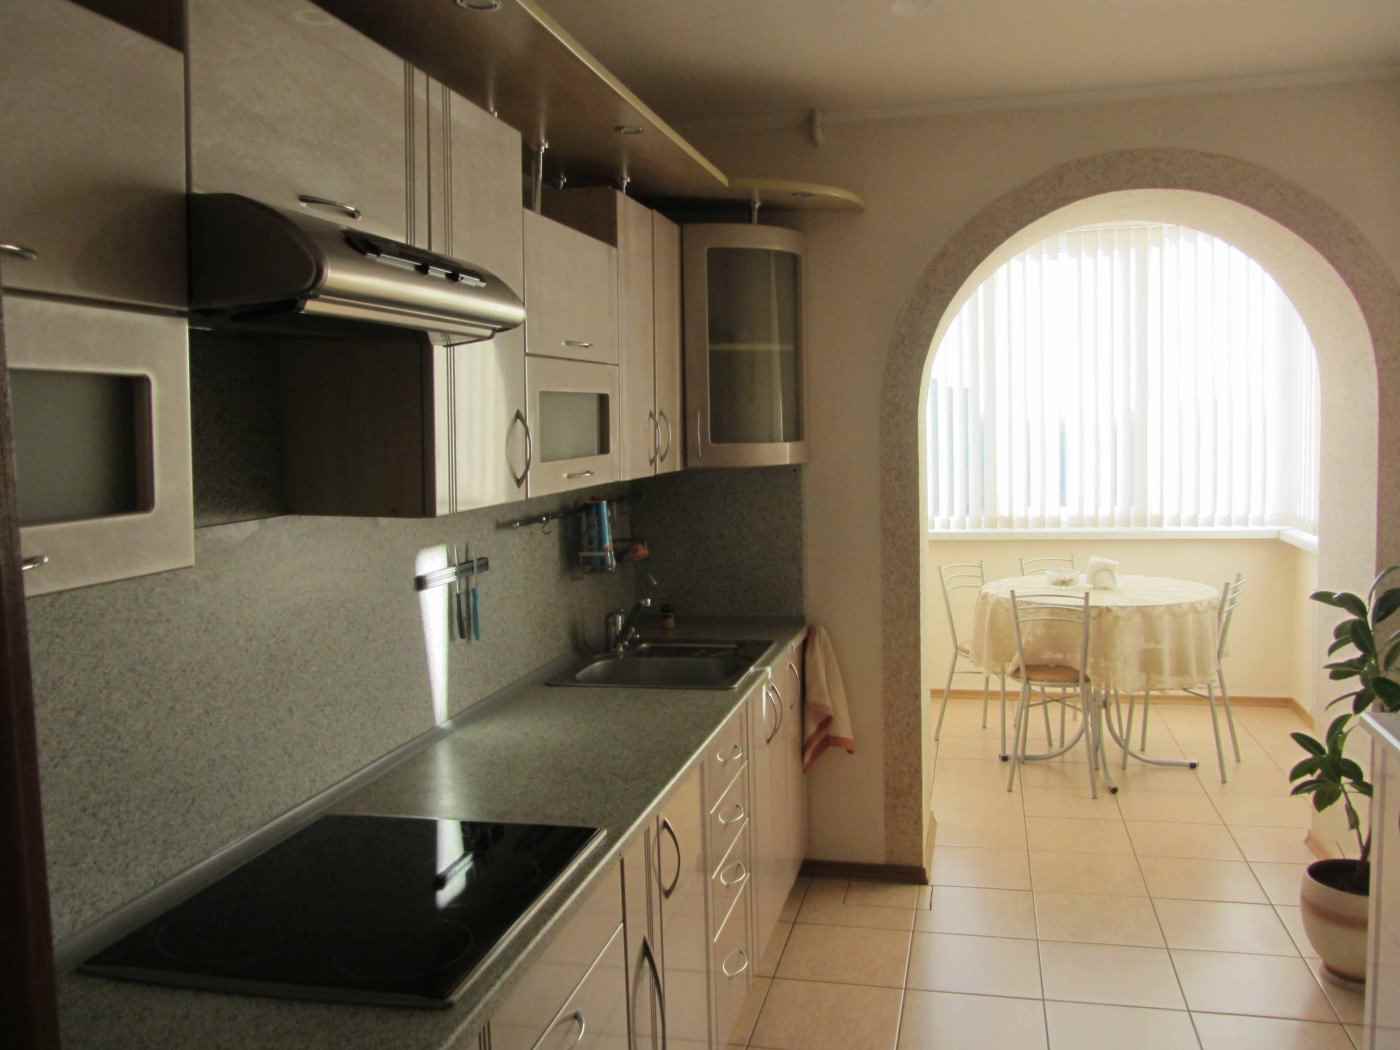 variant of the unusual design of the kitchen 13 sq.m